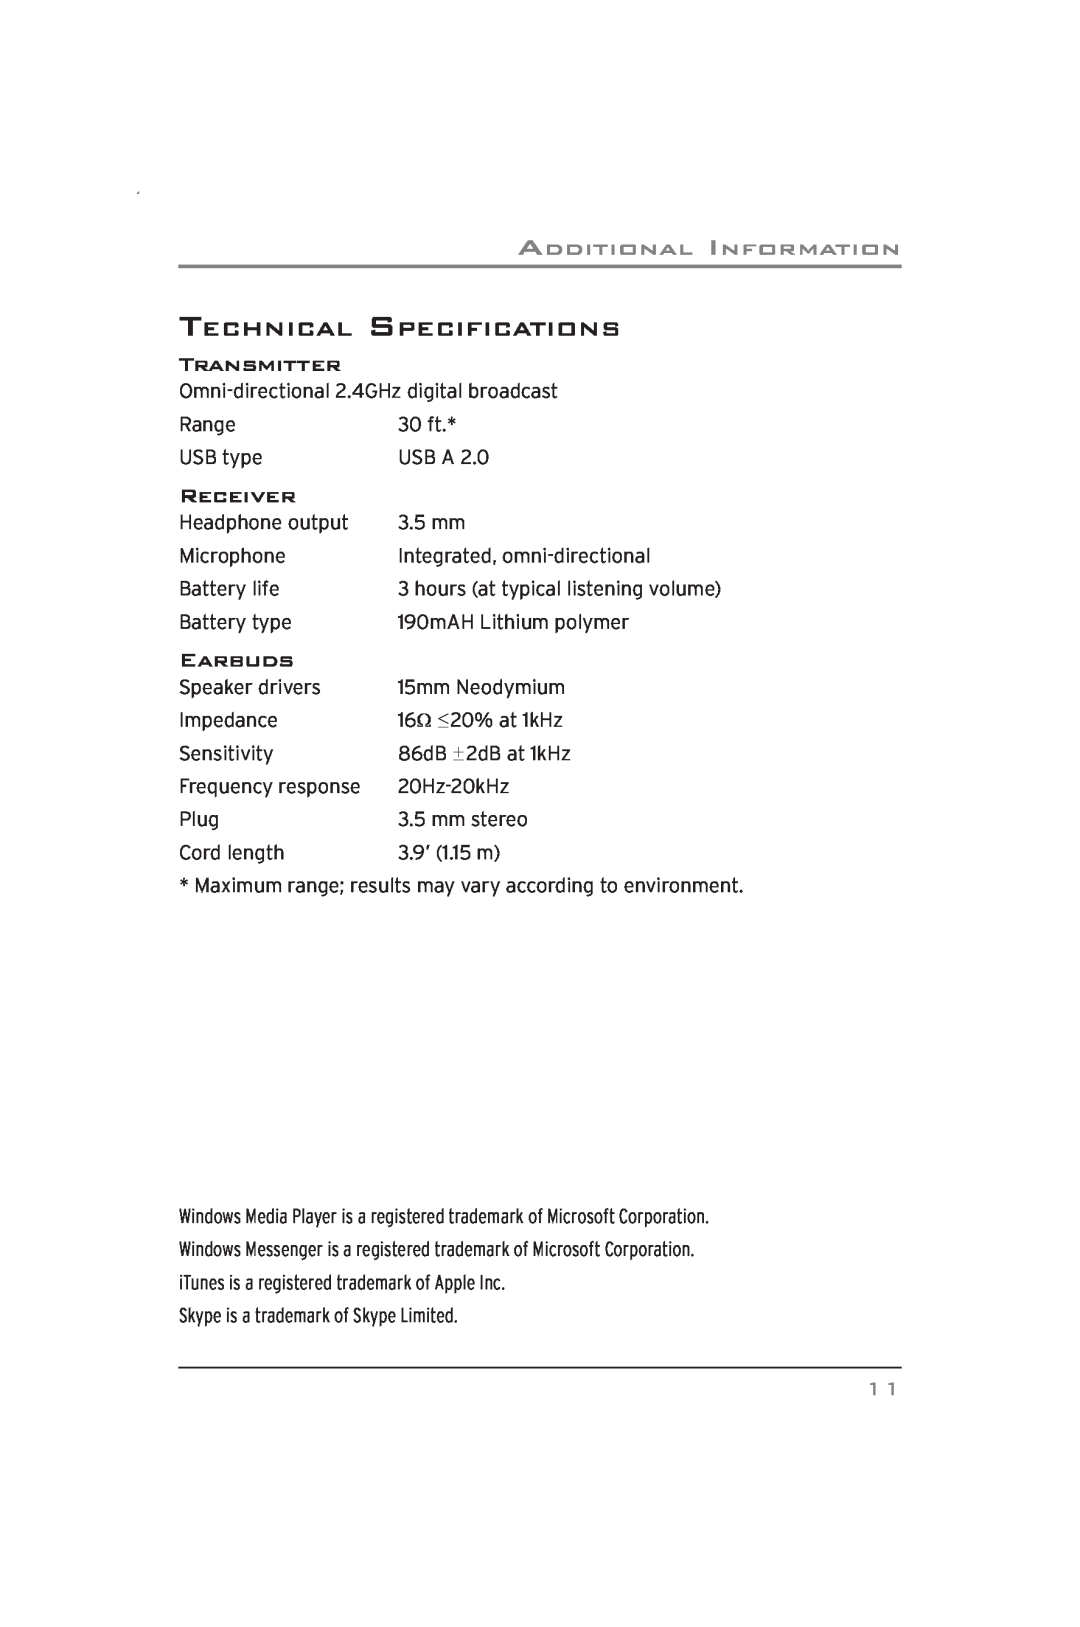 Acoustic Research ARWH2 user manual TECHNICAL SPECIFICATIONS Transmitter, Receiver, Earbuds 